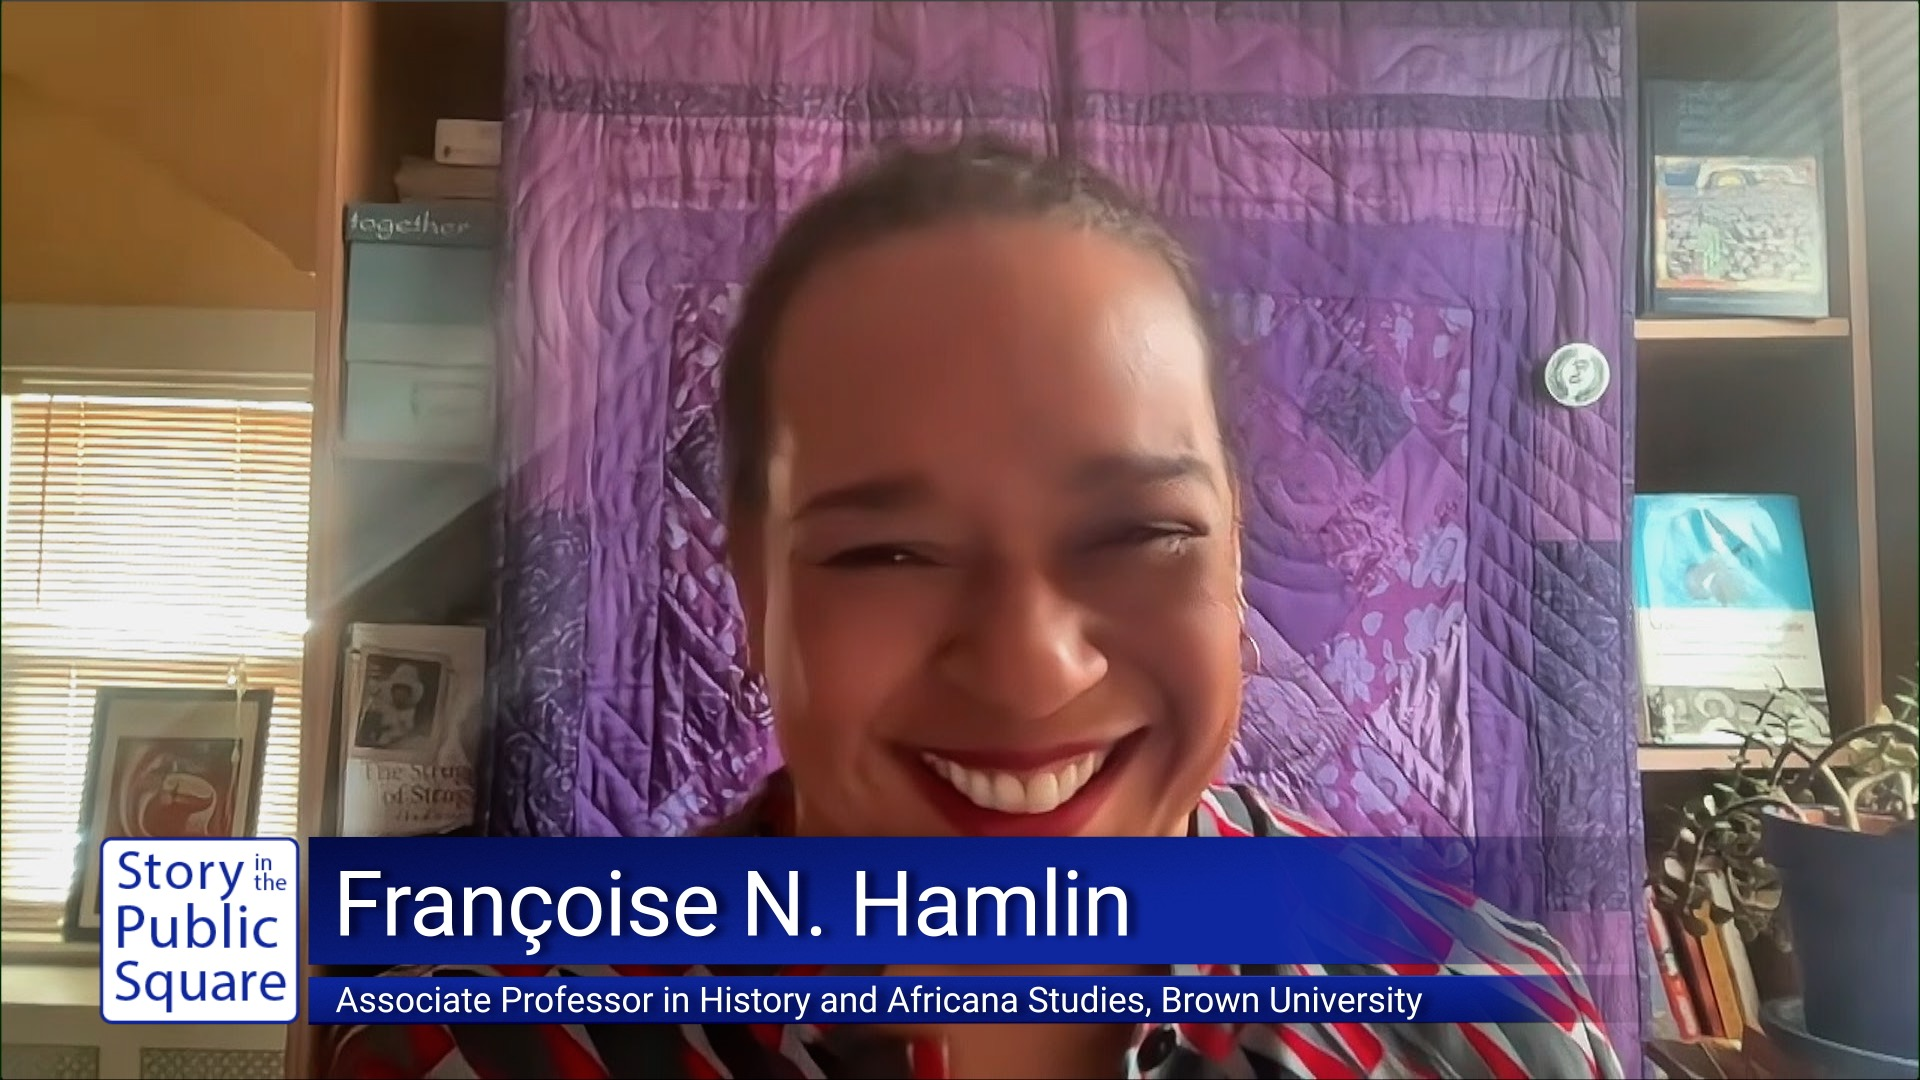 Analyzing Historical Race Relations and their Contemporary Implications with Françoise N. Hamlin